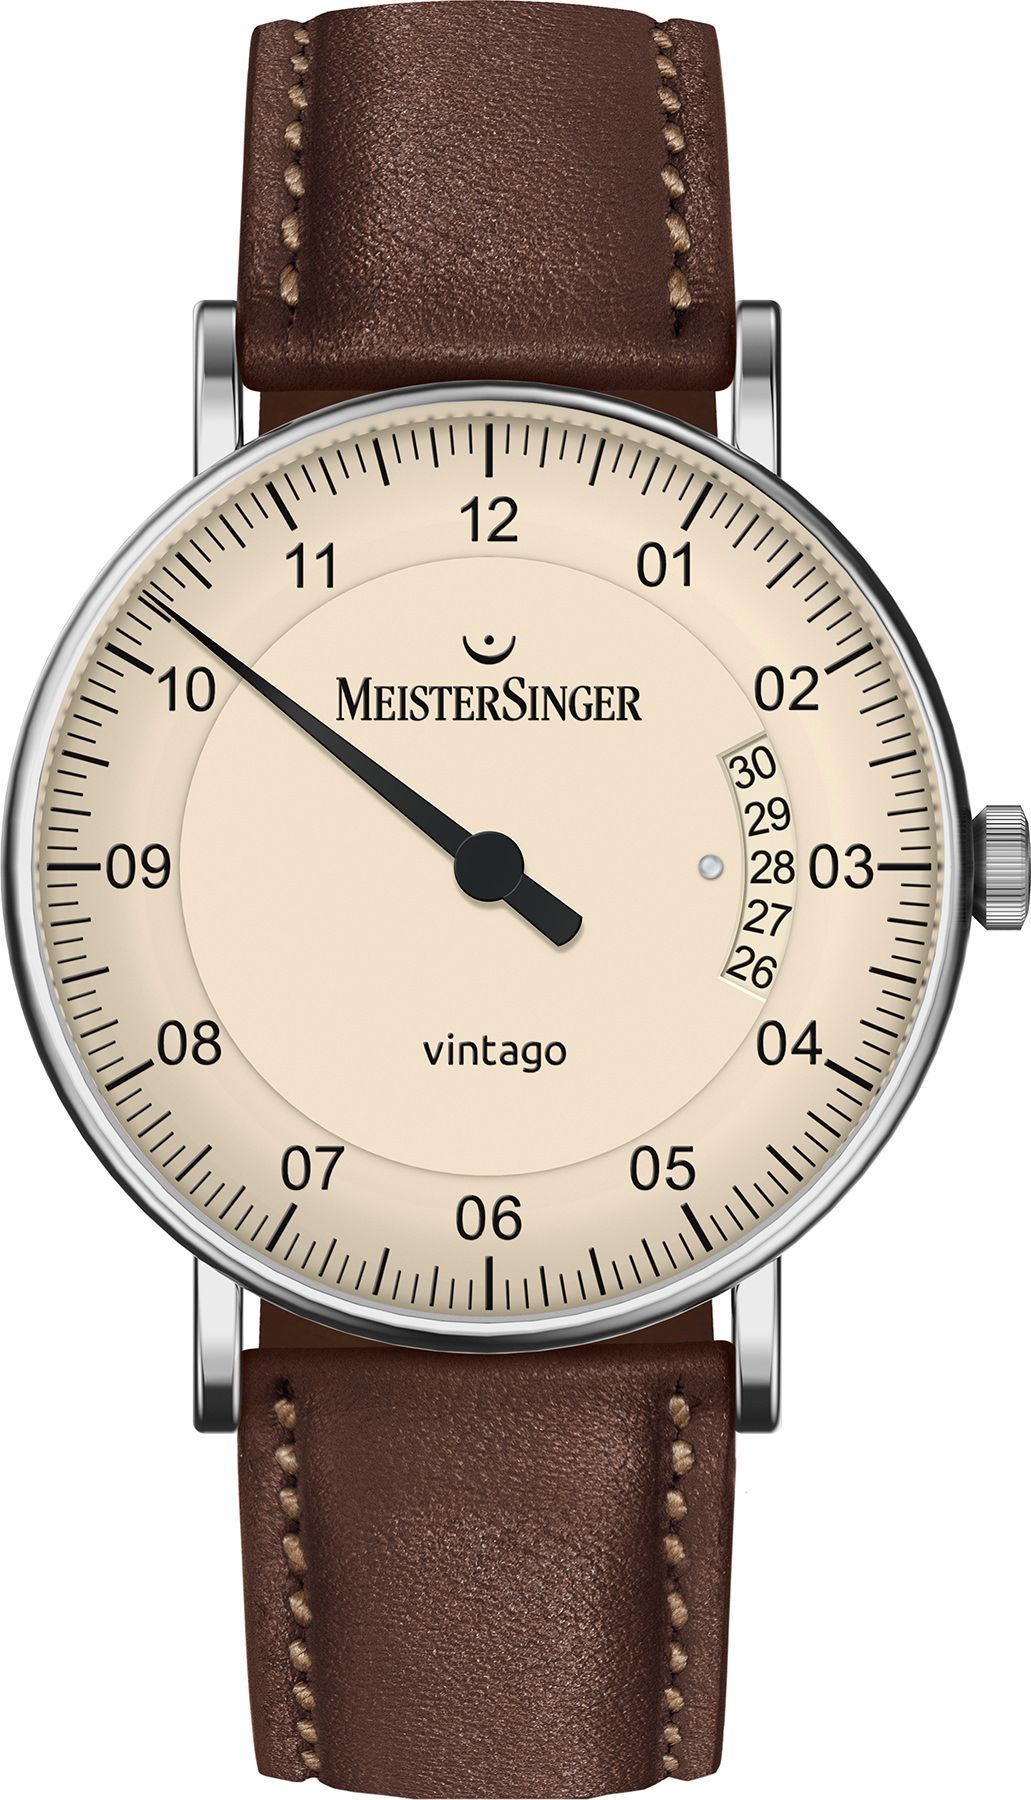 MeisterSinger  Vintago Ivory Dial 38 mm Automatic Watch For Men - 1